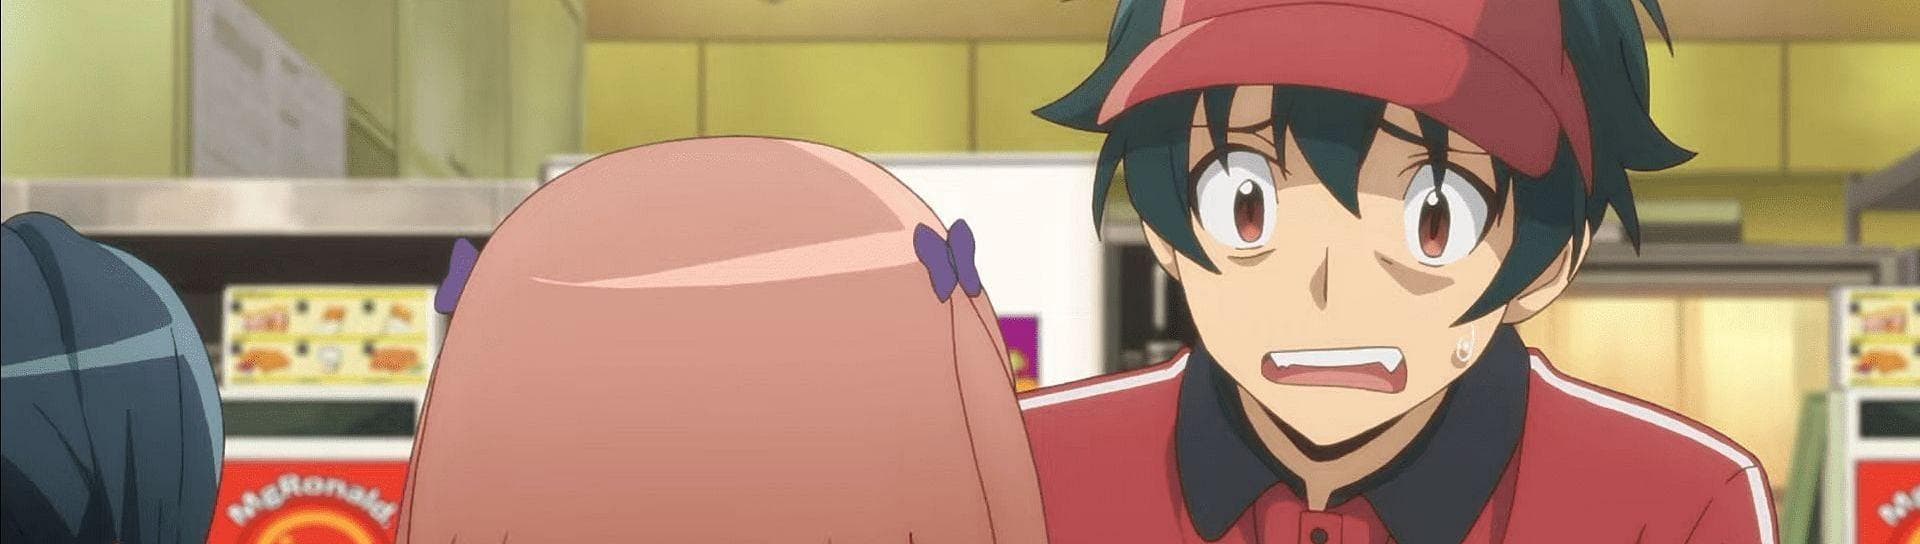 The Devil Is A Part-Timer! & 9 Other Anime Series That Have An Absurd  Premise But Make It Work